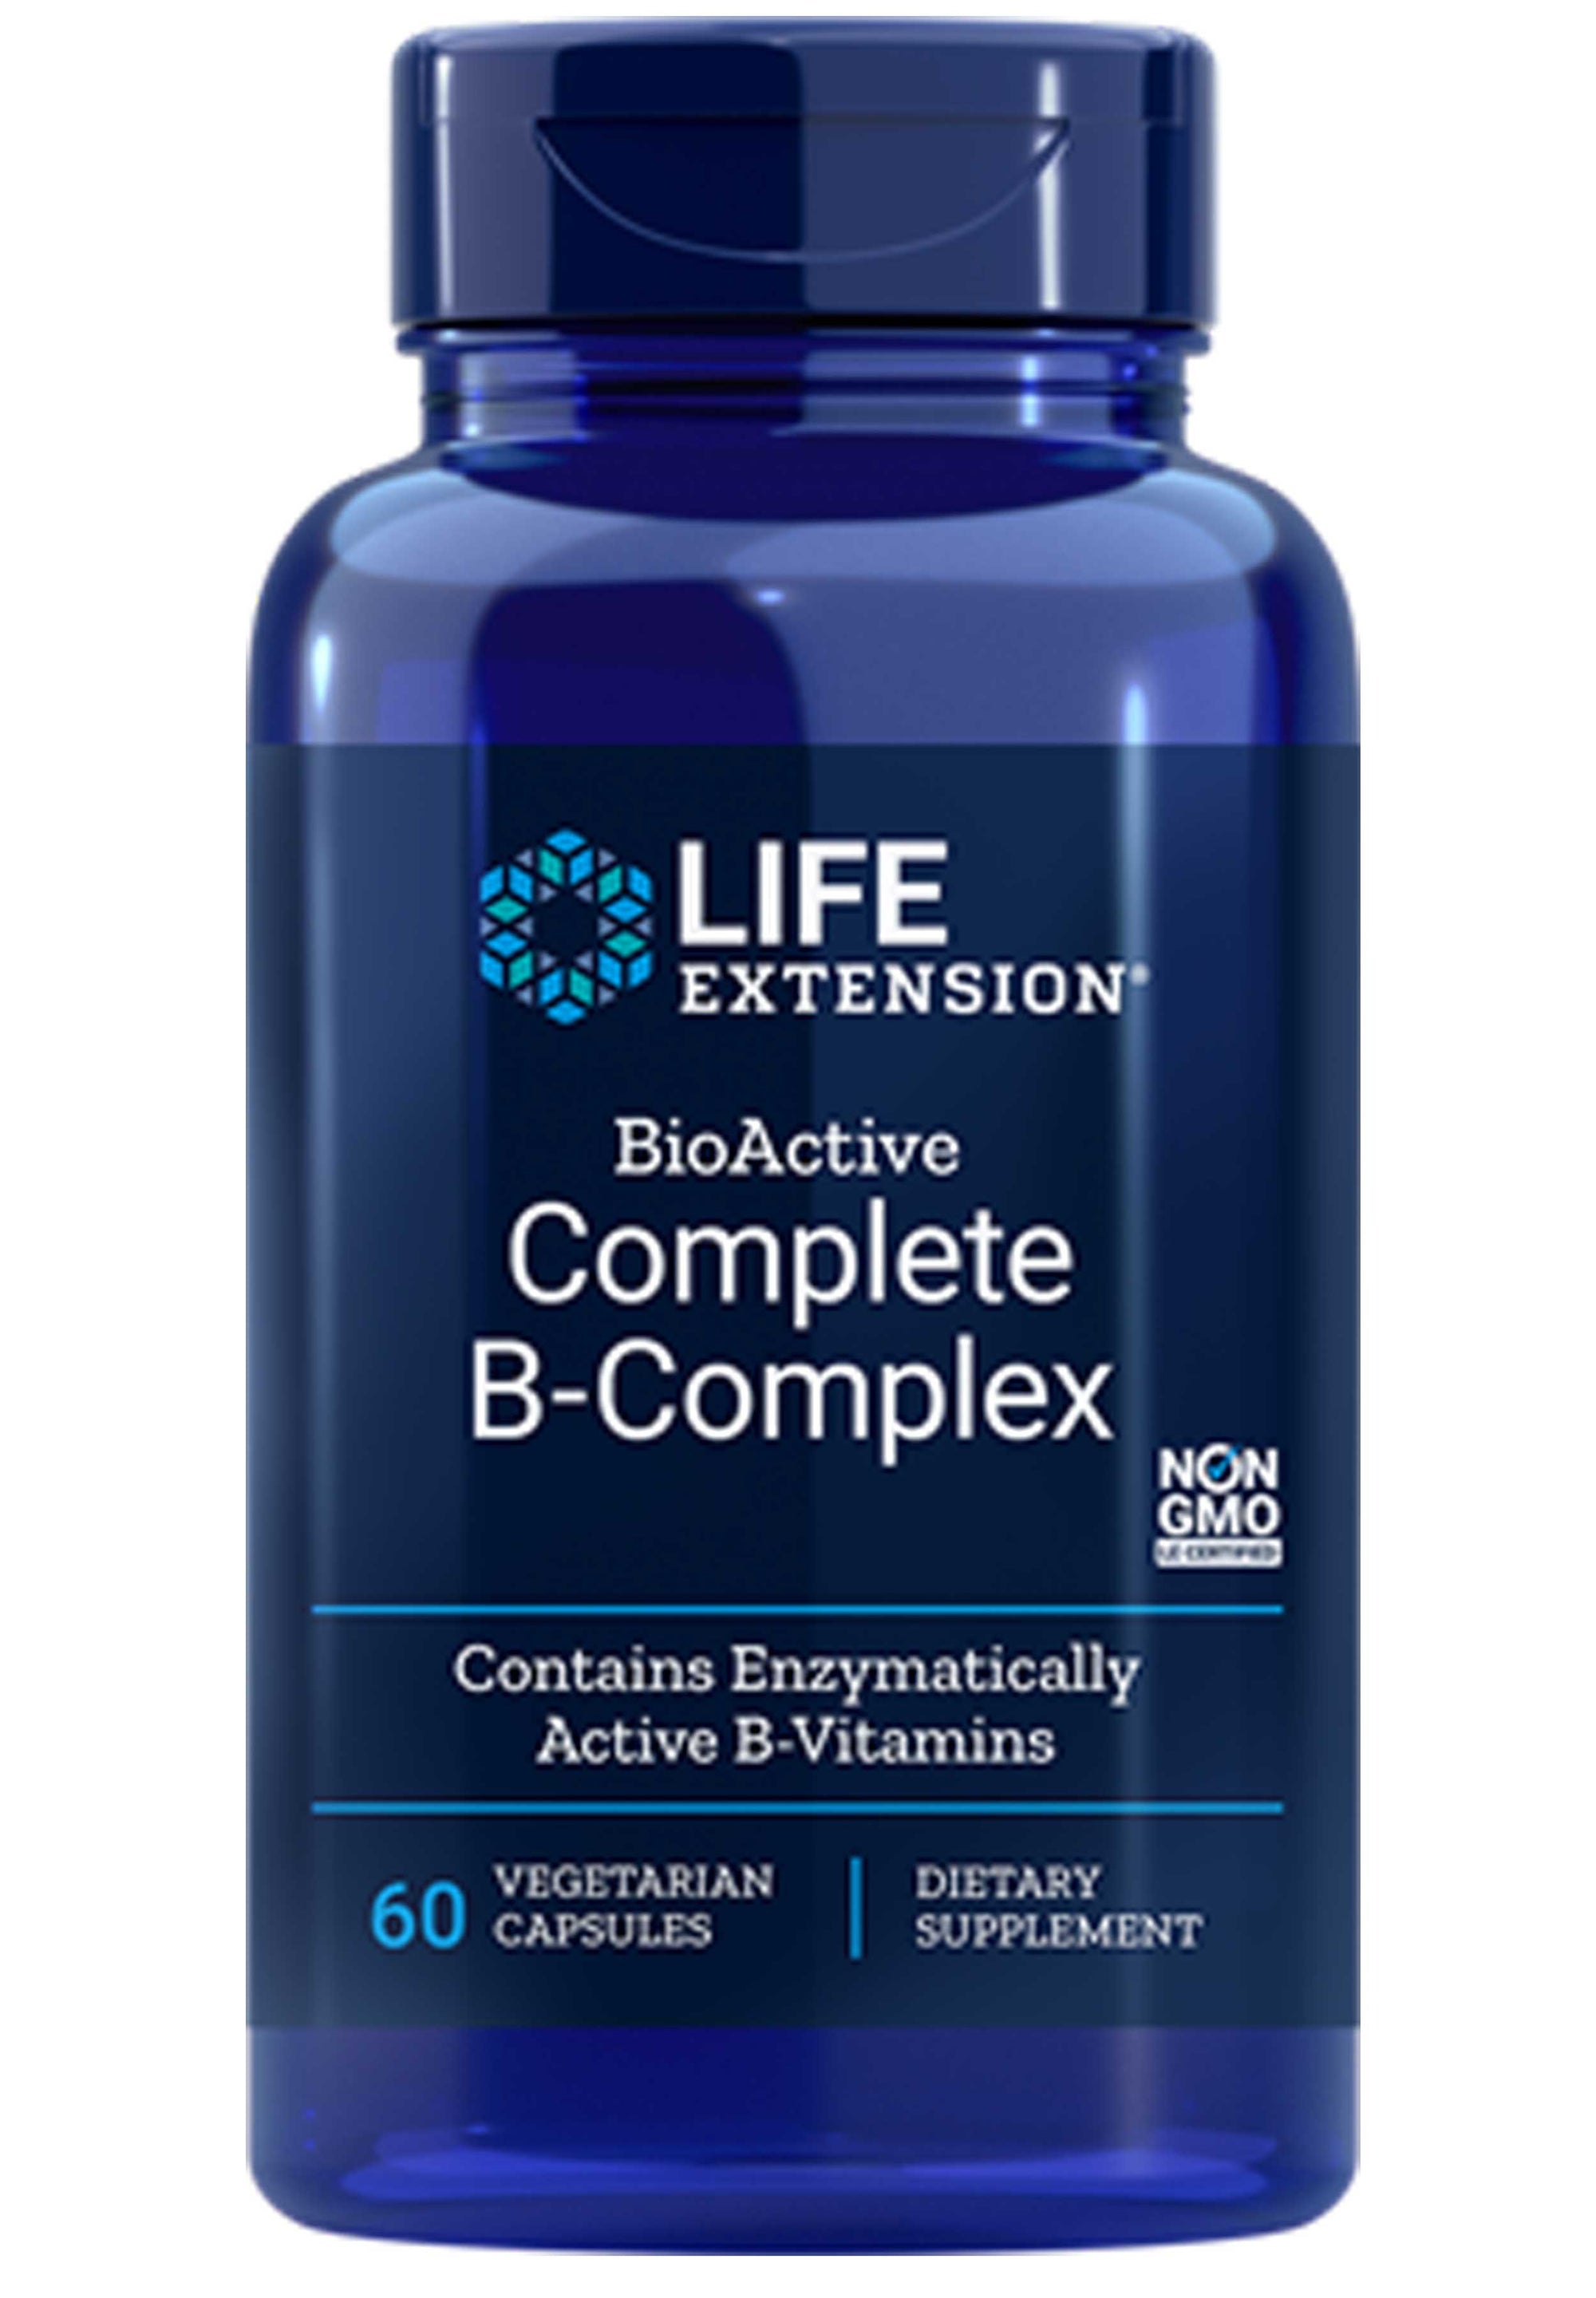 Life Extension BioActive Complete Supplement First